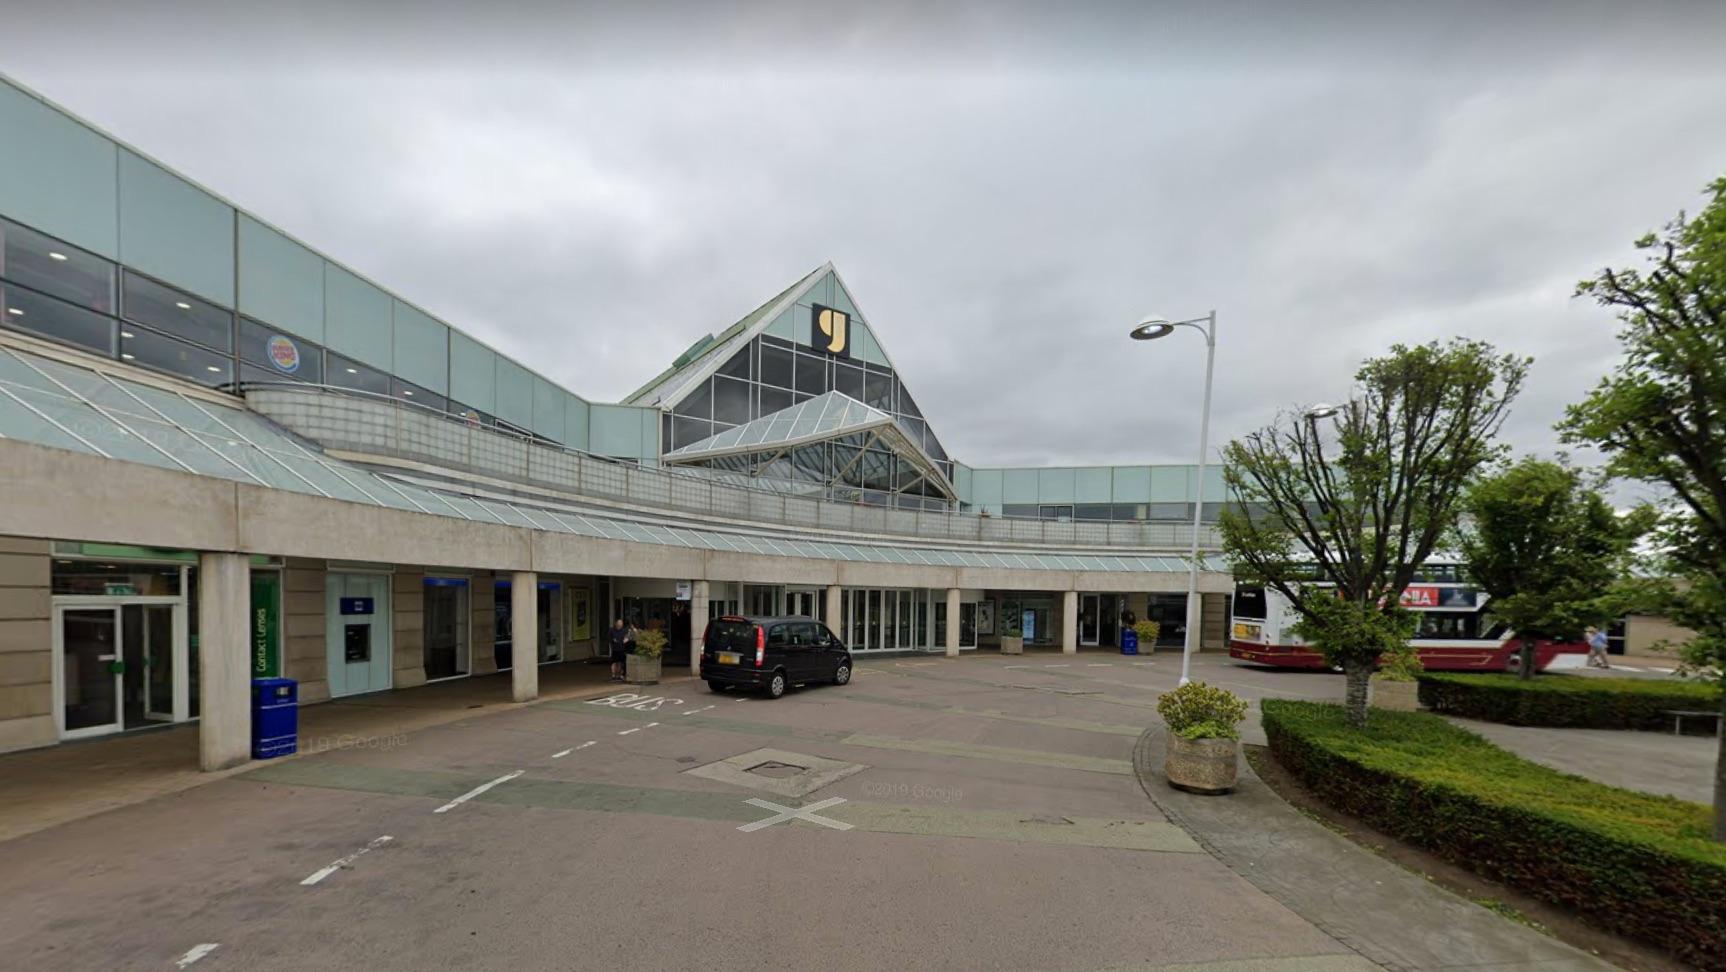 Plans to extend Edinburgh’s Gyle shopping centre with new food court